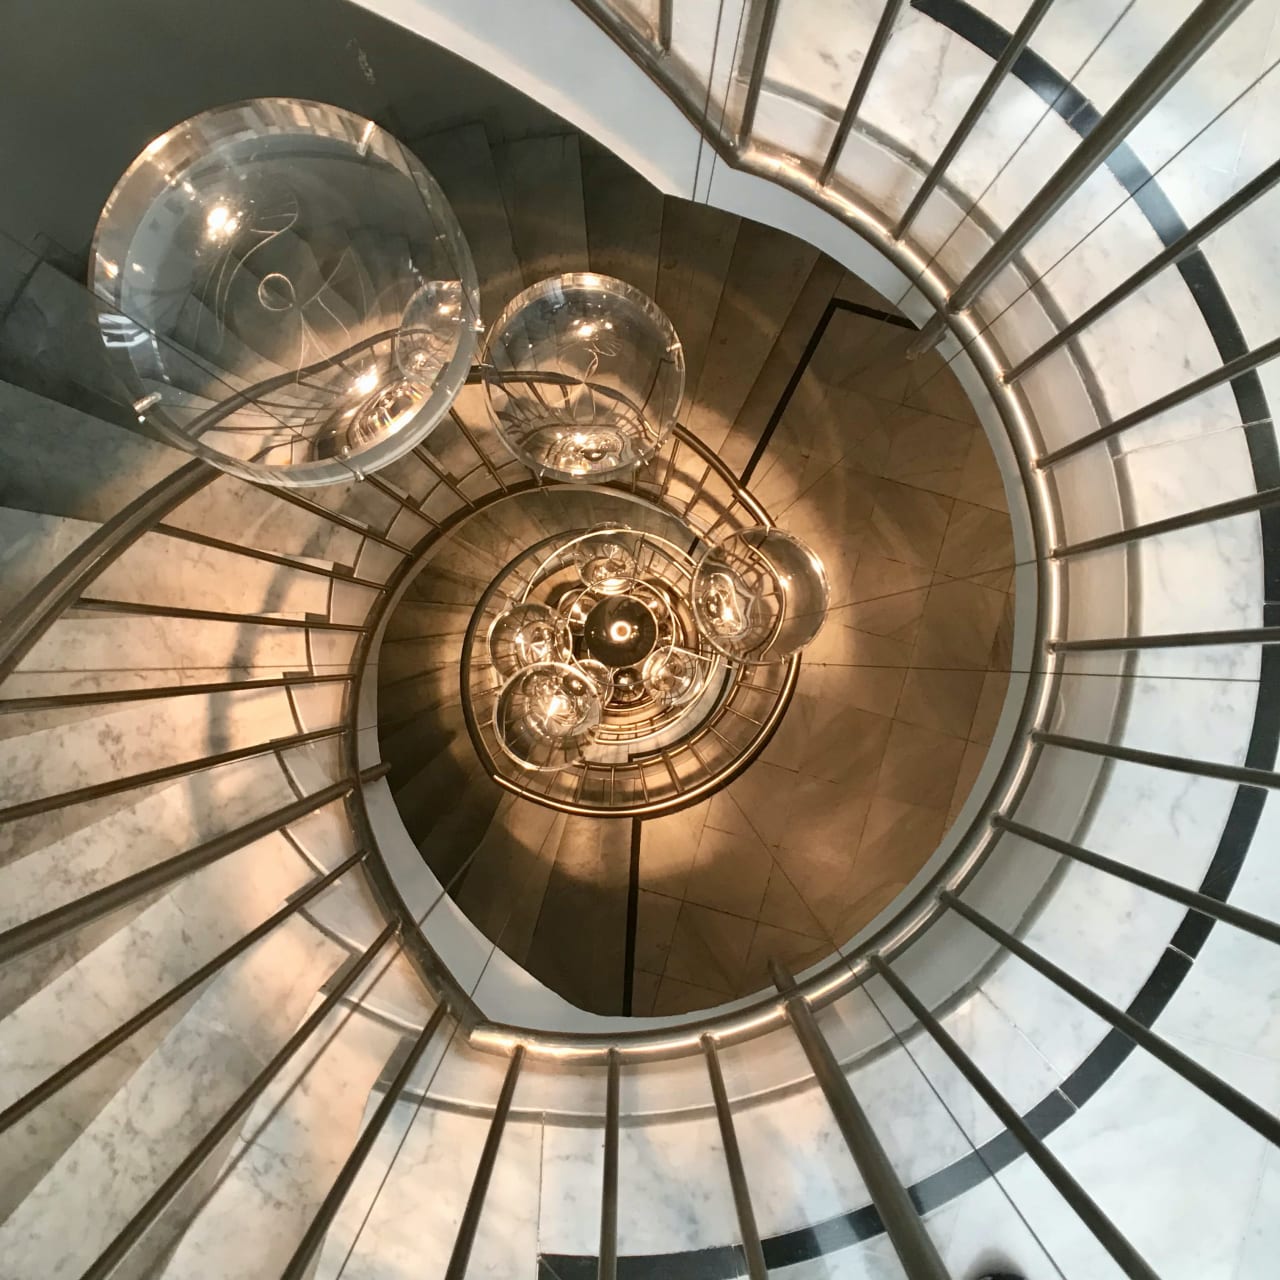 A spiral staircase with a chandelier in the center.